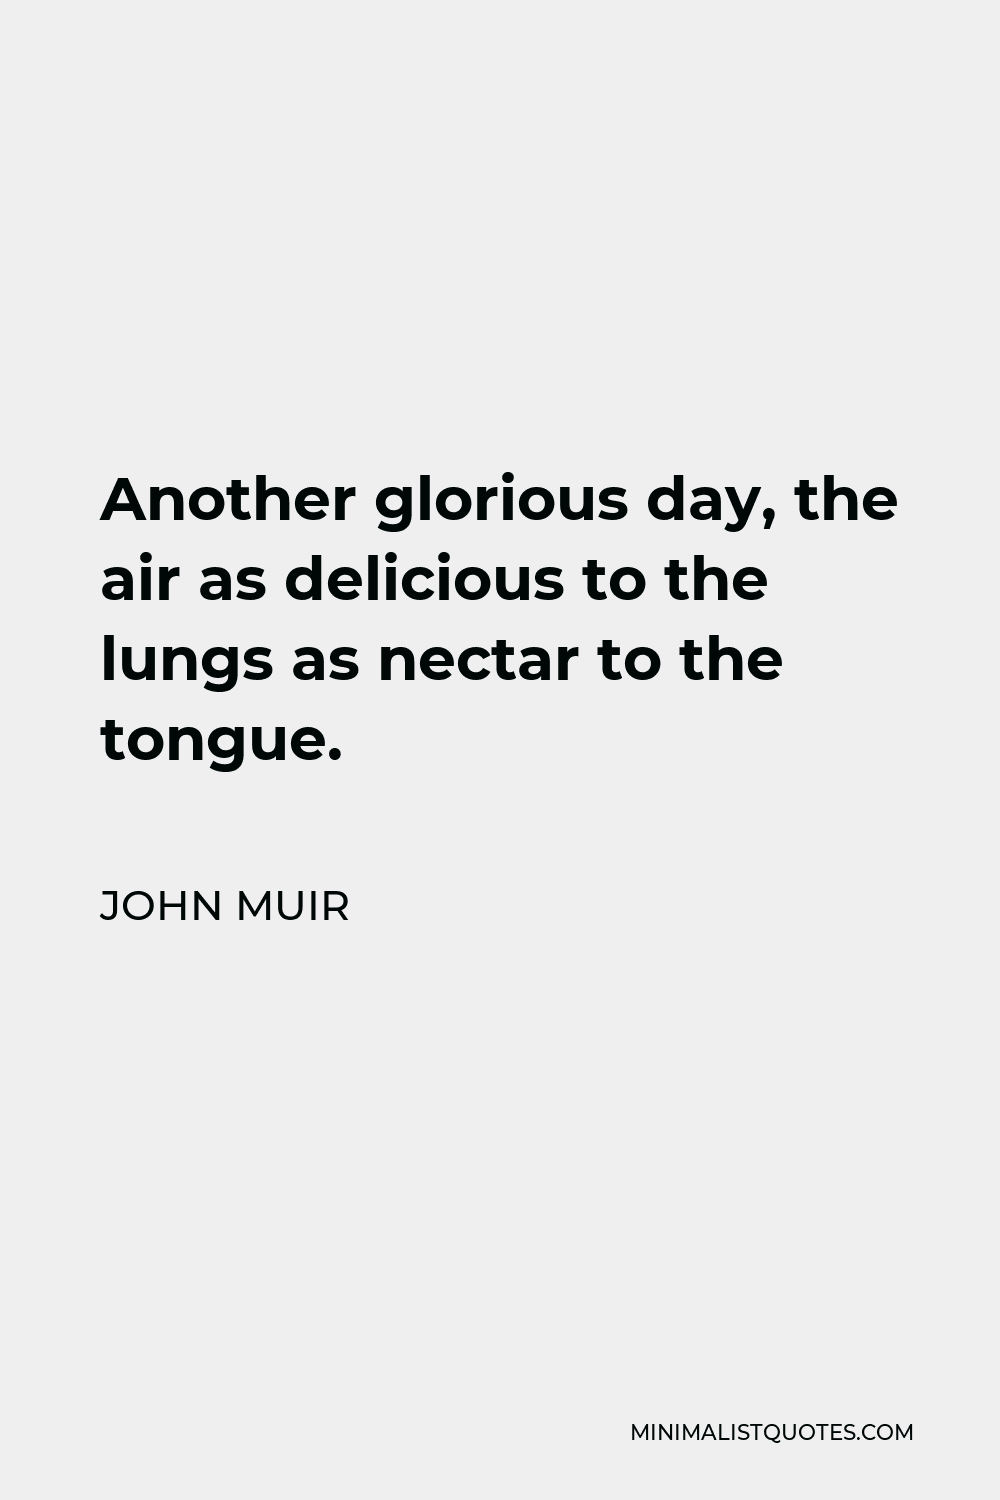 John Muir Quote - Another glorious day, the air as delicious to the lungs as nectar to the tongue.